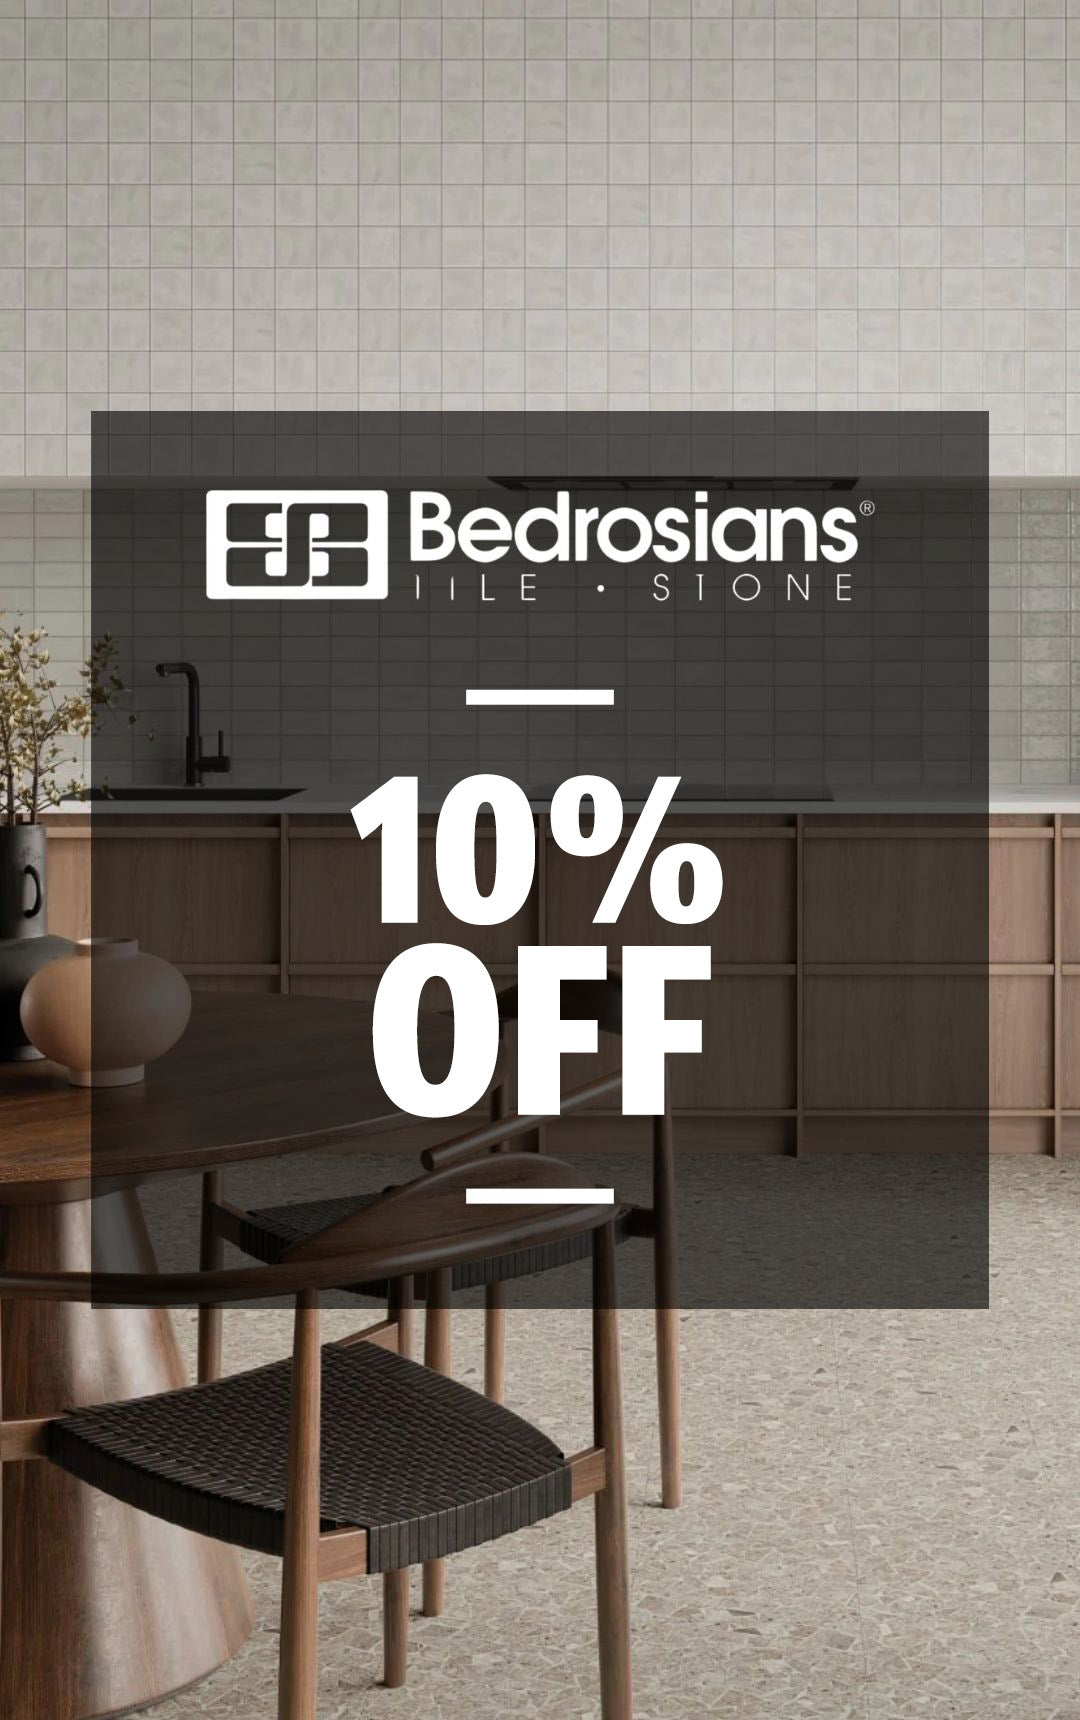 Bedrosians tiles available at a discount.